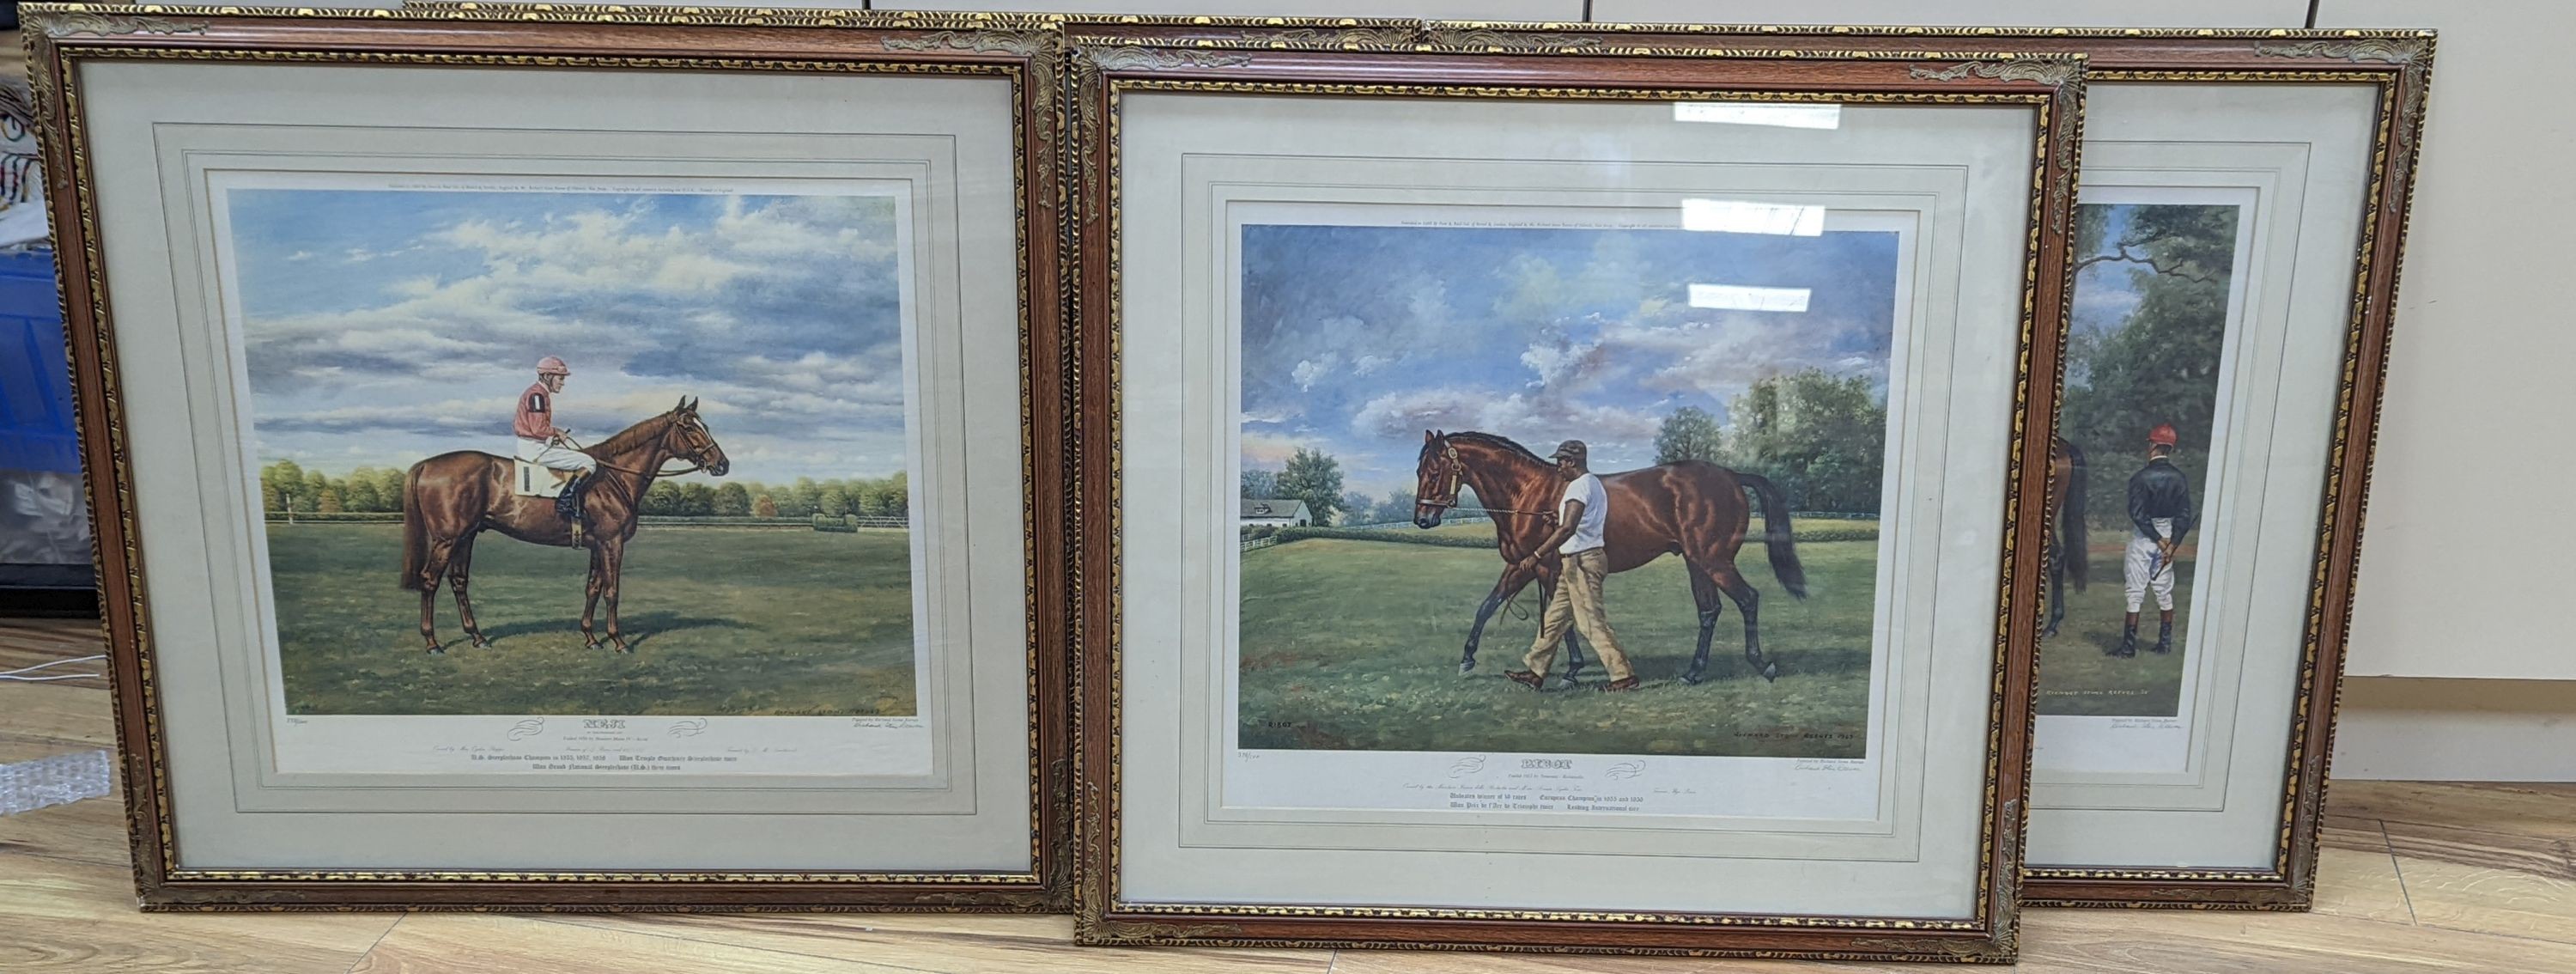 Richard Stone Reeves (1919-2005), set of four limited edition prints, Portraits of racehorses: Neji, Pibot, Buckpasser and Kelso, signed in pencil and numbered from the edition of 500, 44 x 48cm